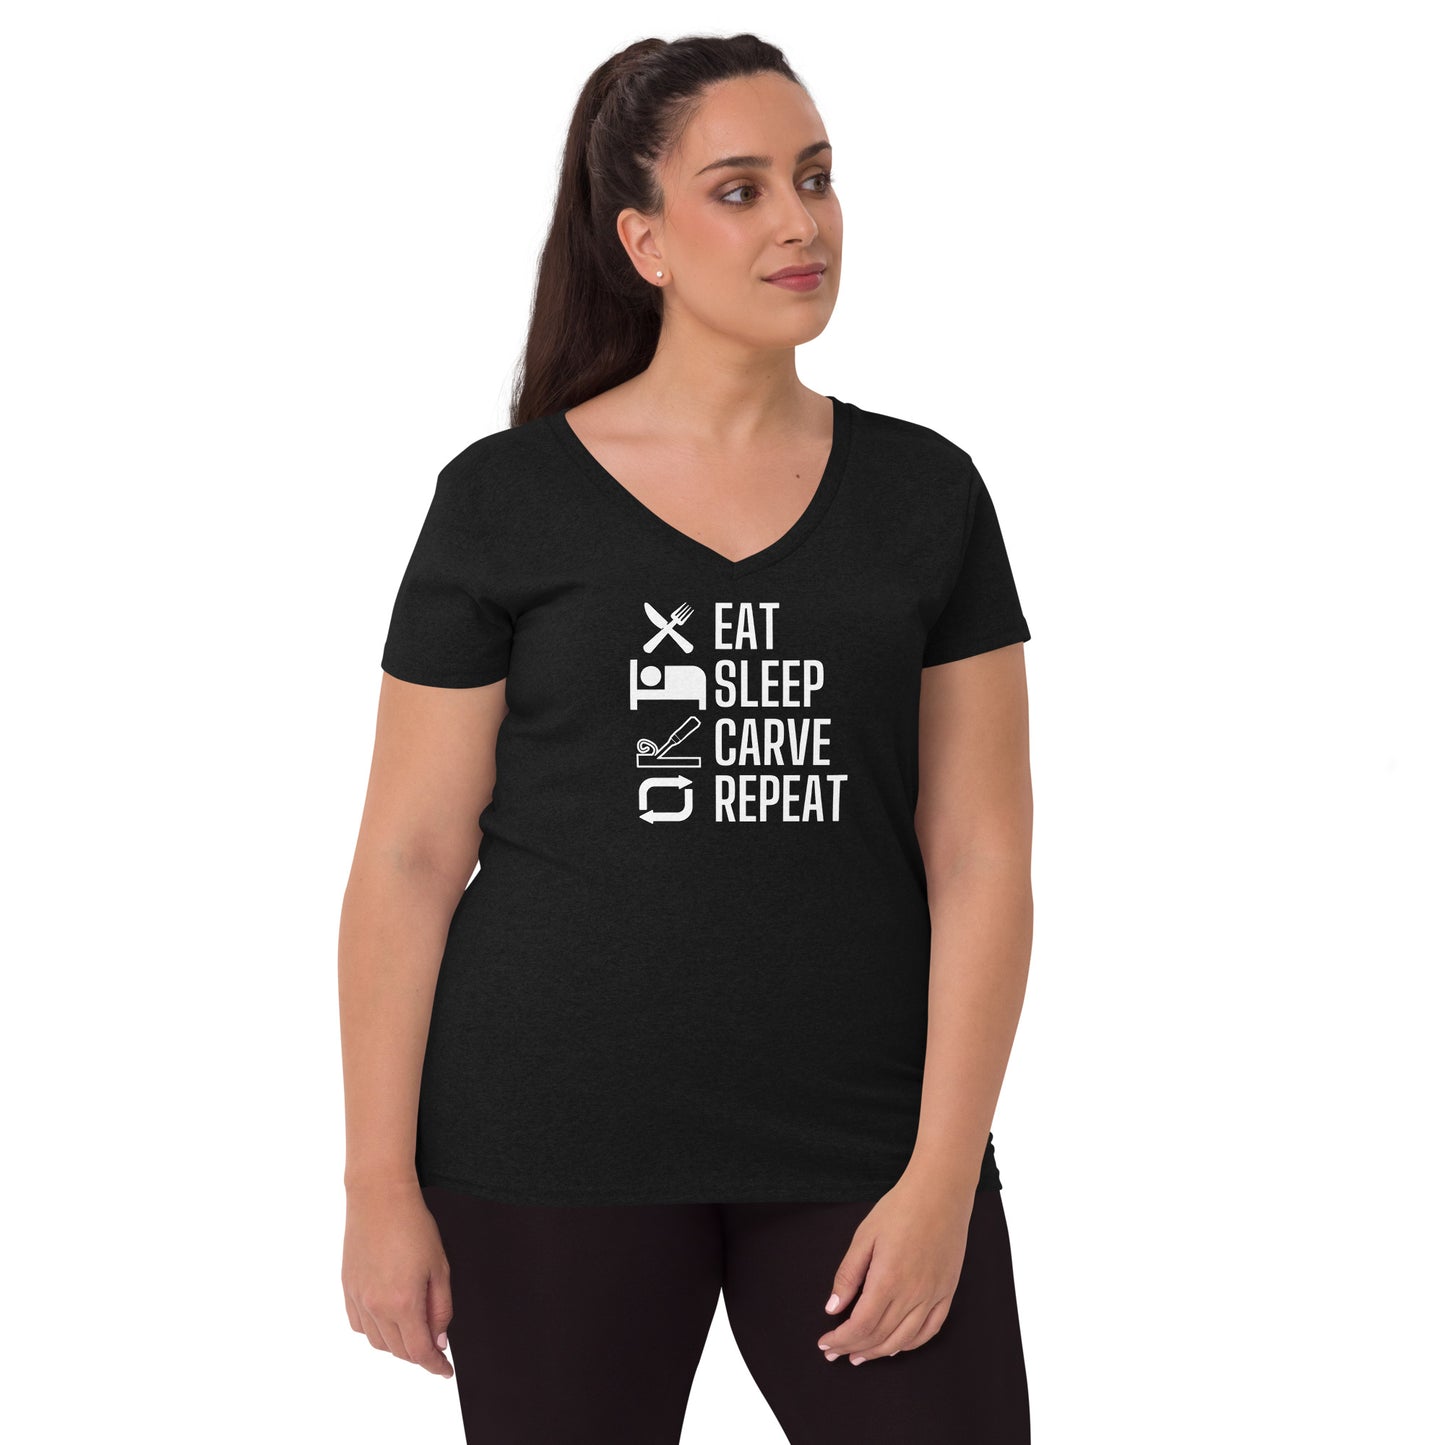 Eat, Sleep, Carve, Repeat - Women’s recycled v-neck t-shirt